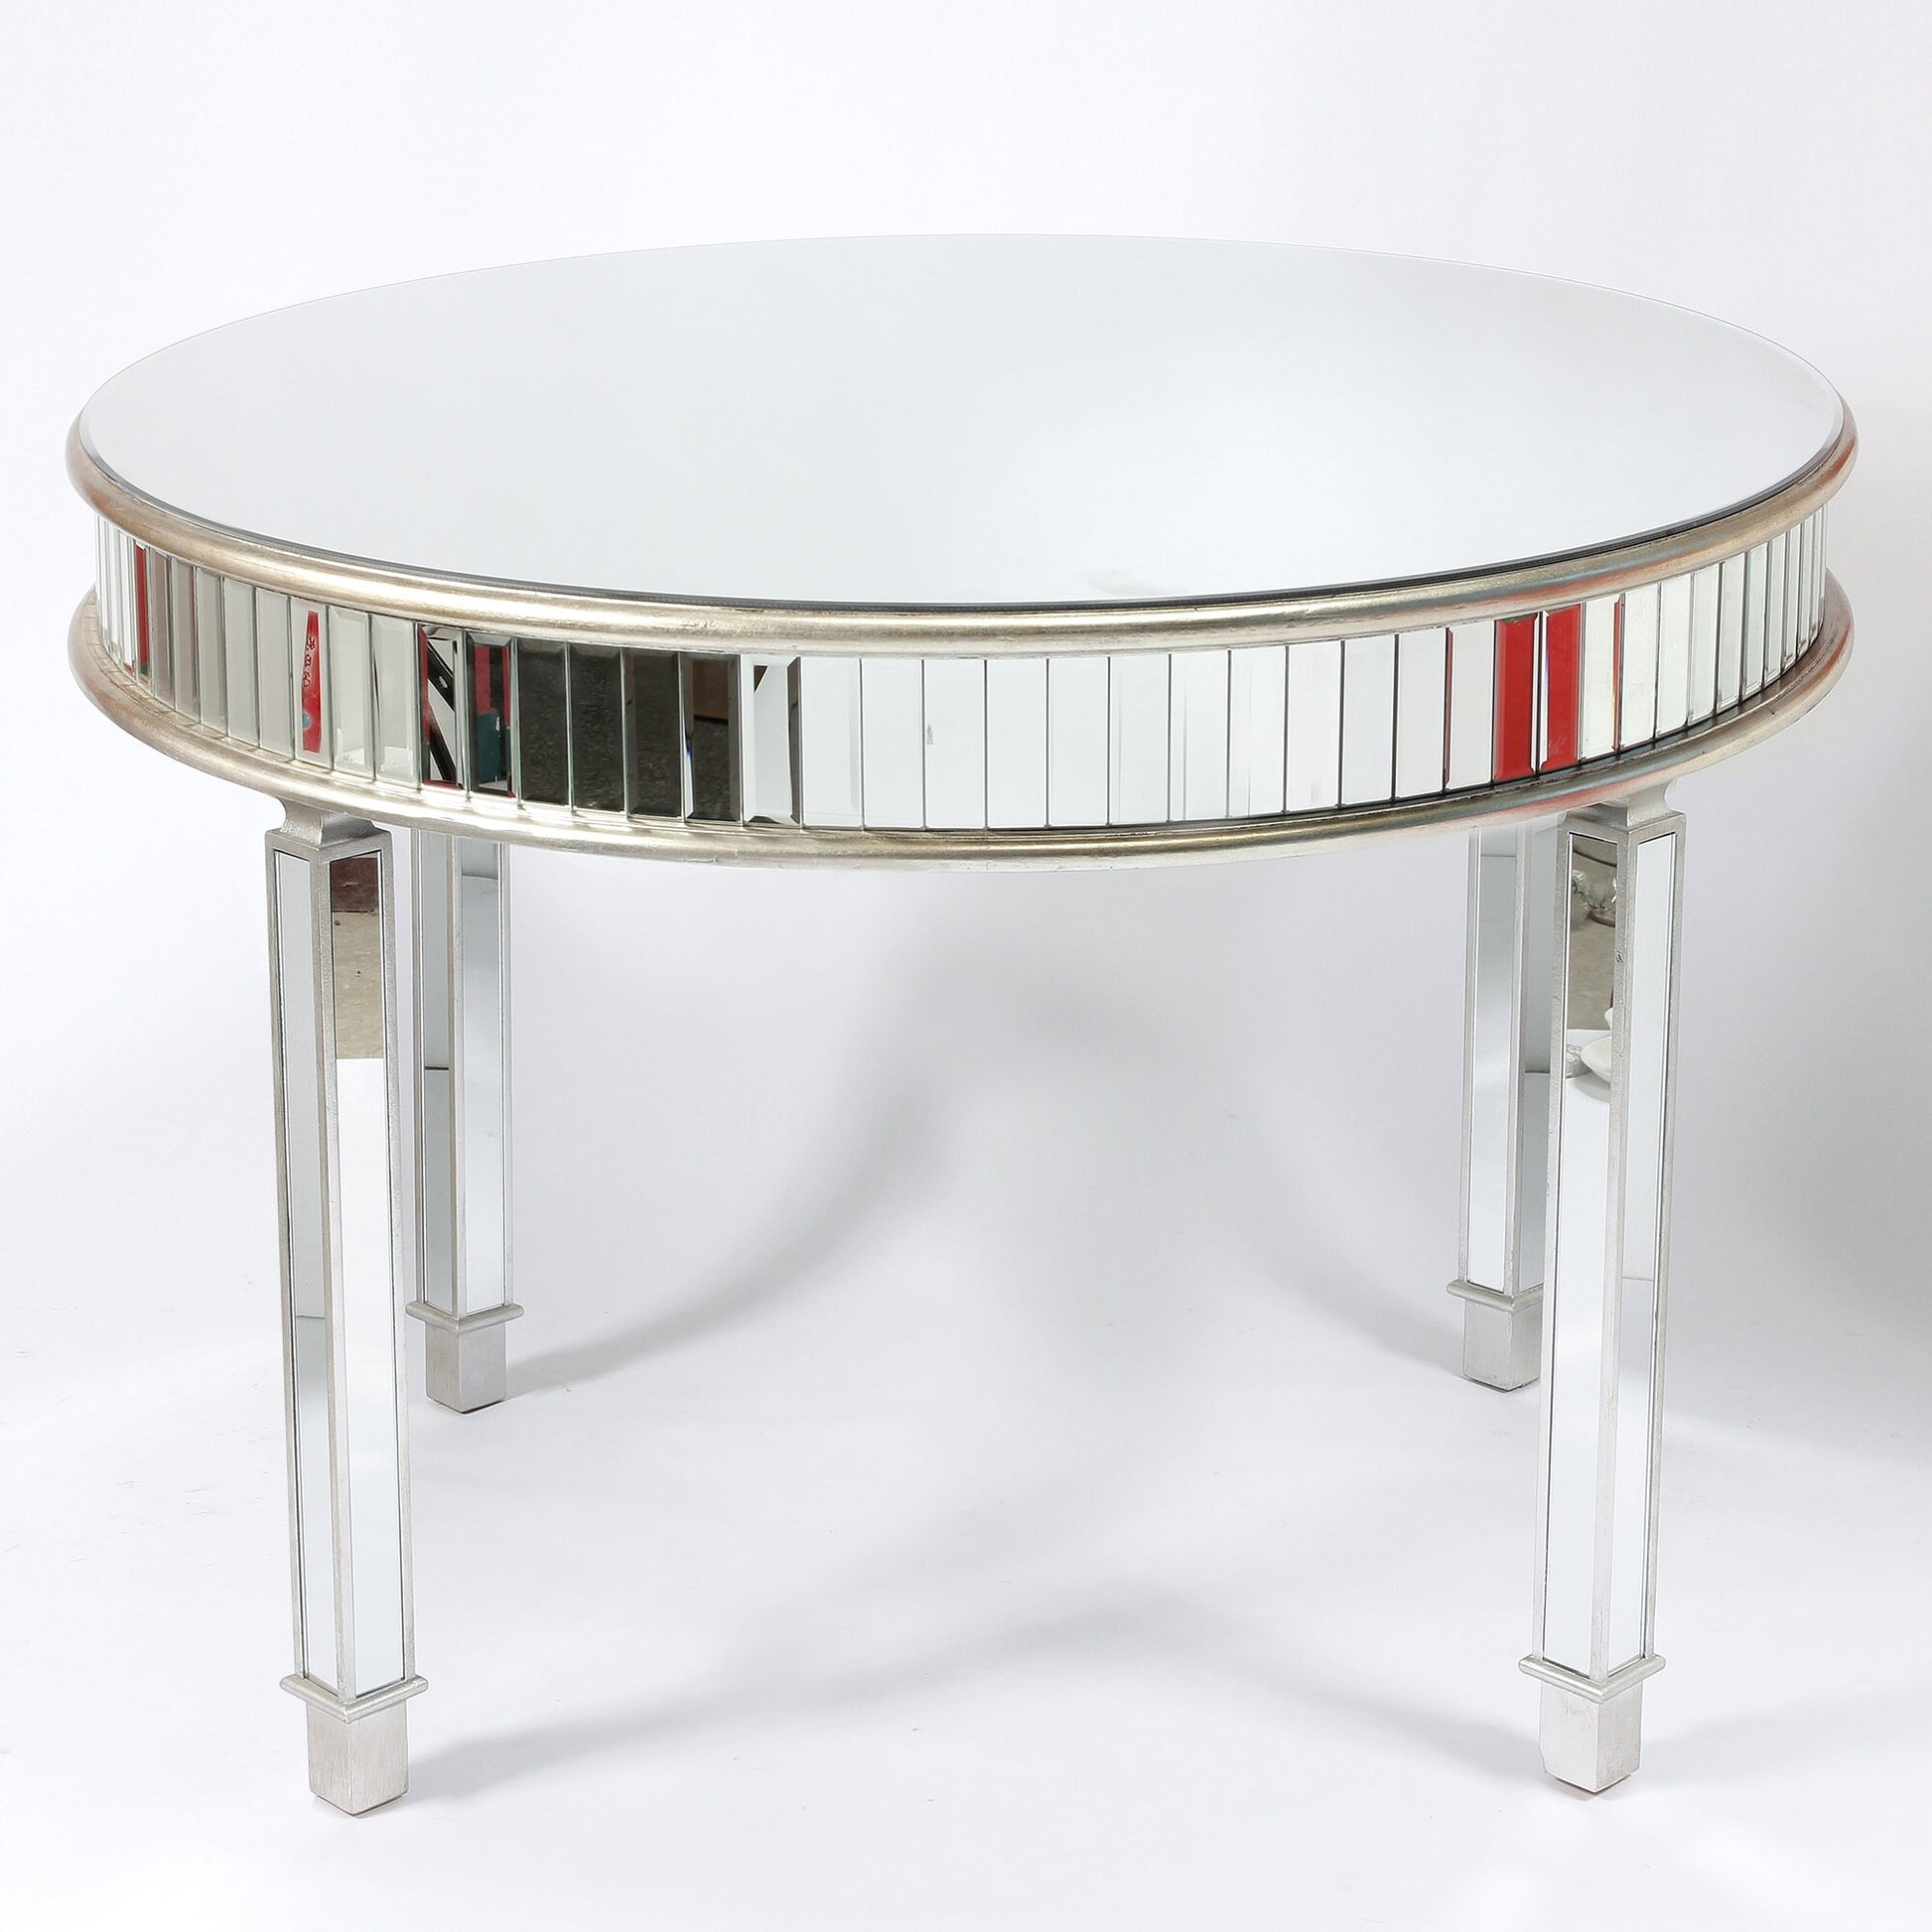 Mirrored 4 Seater Silver Round Dining Table